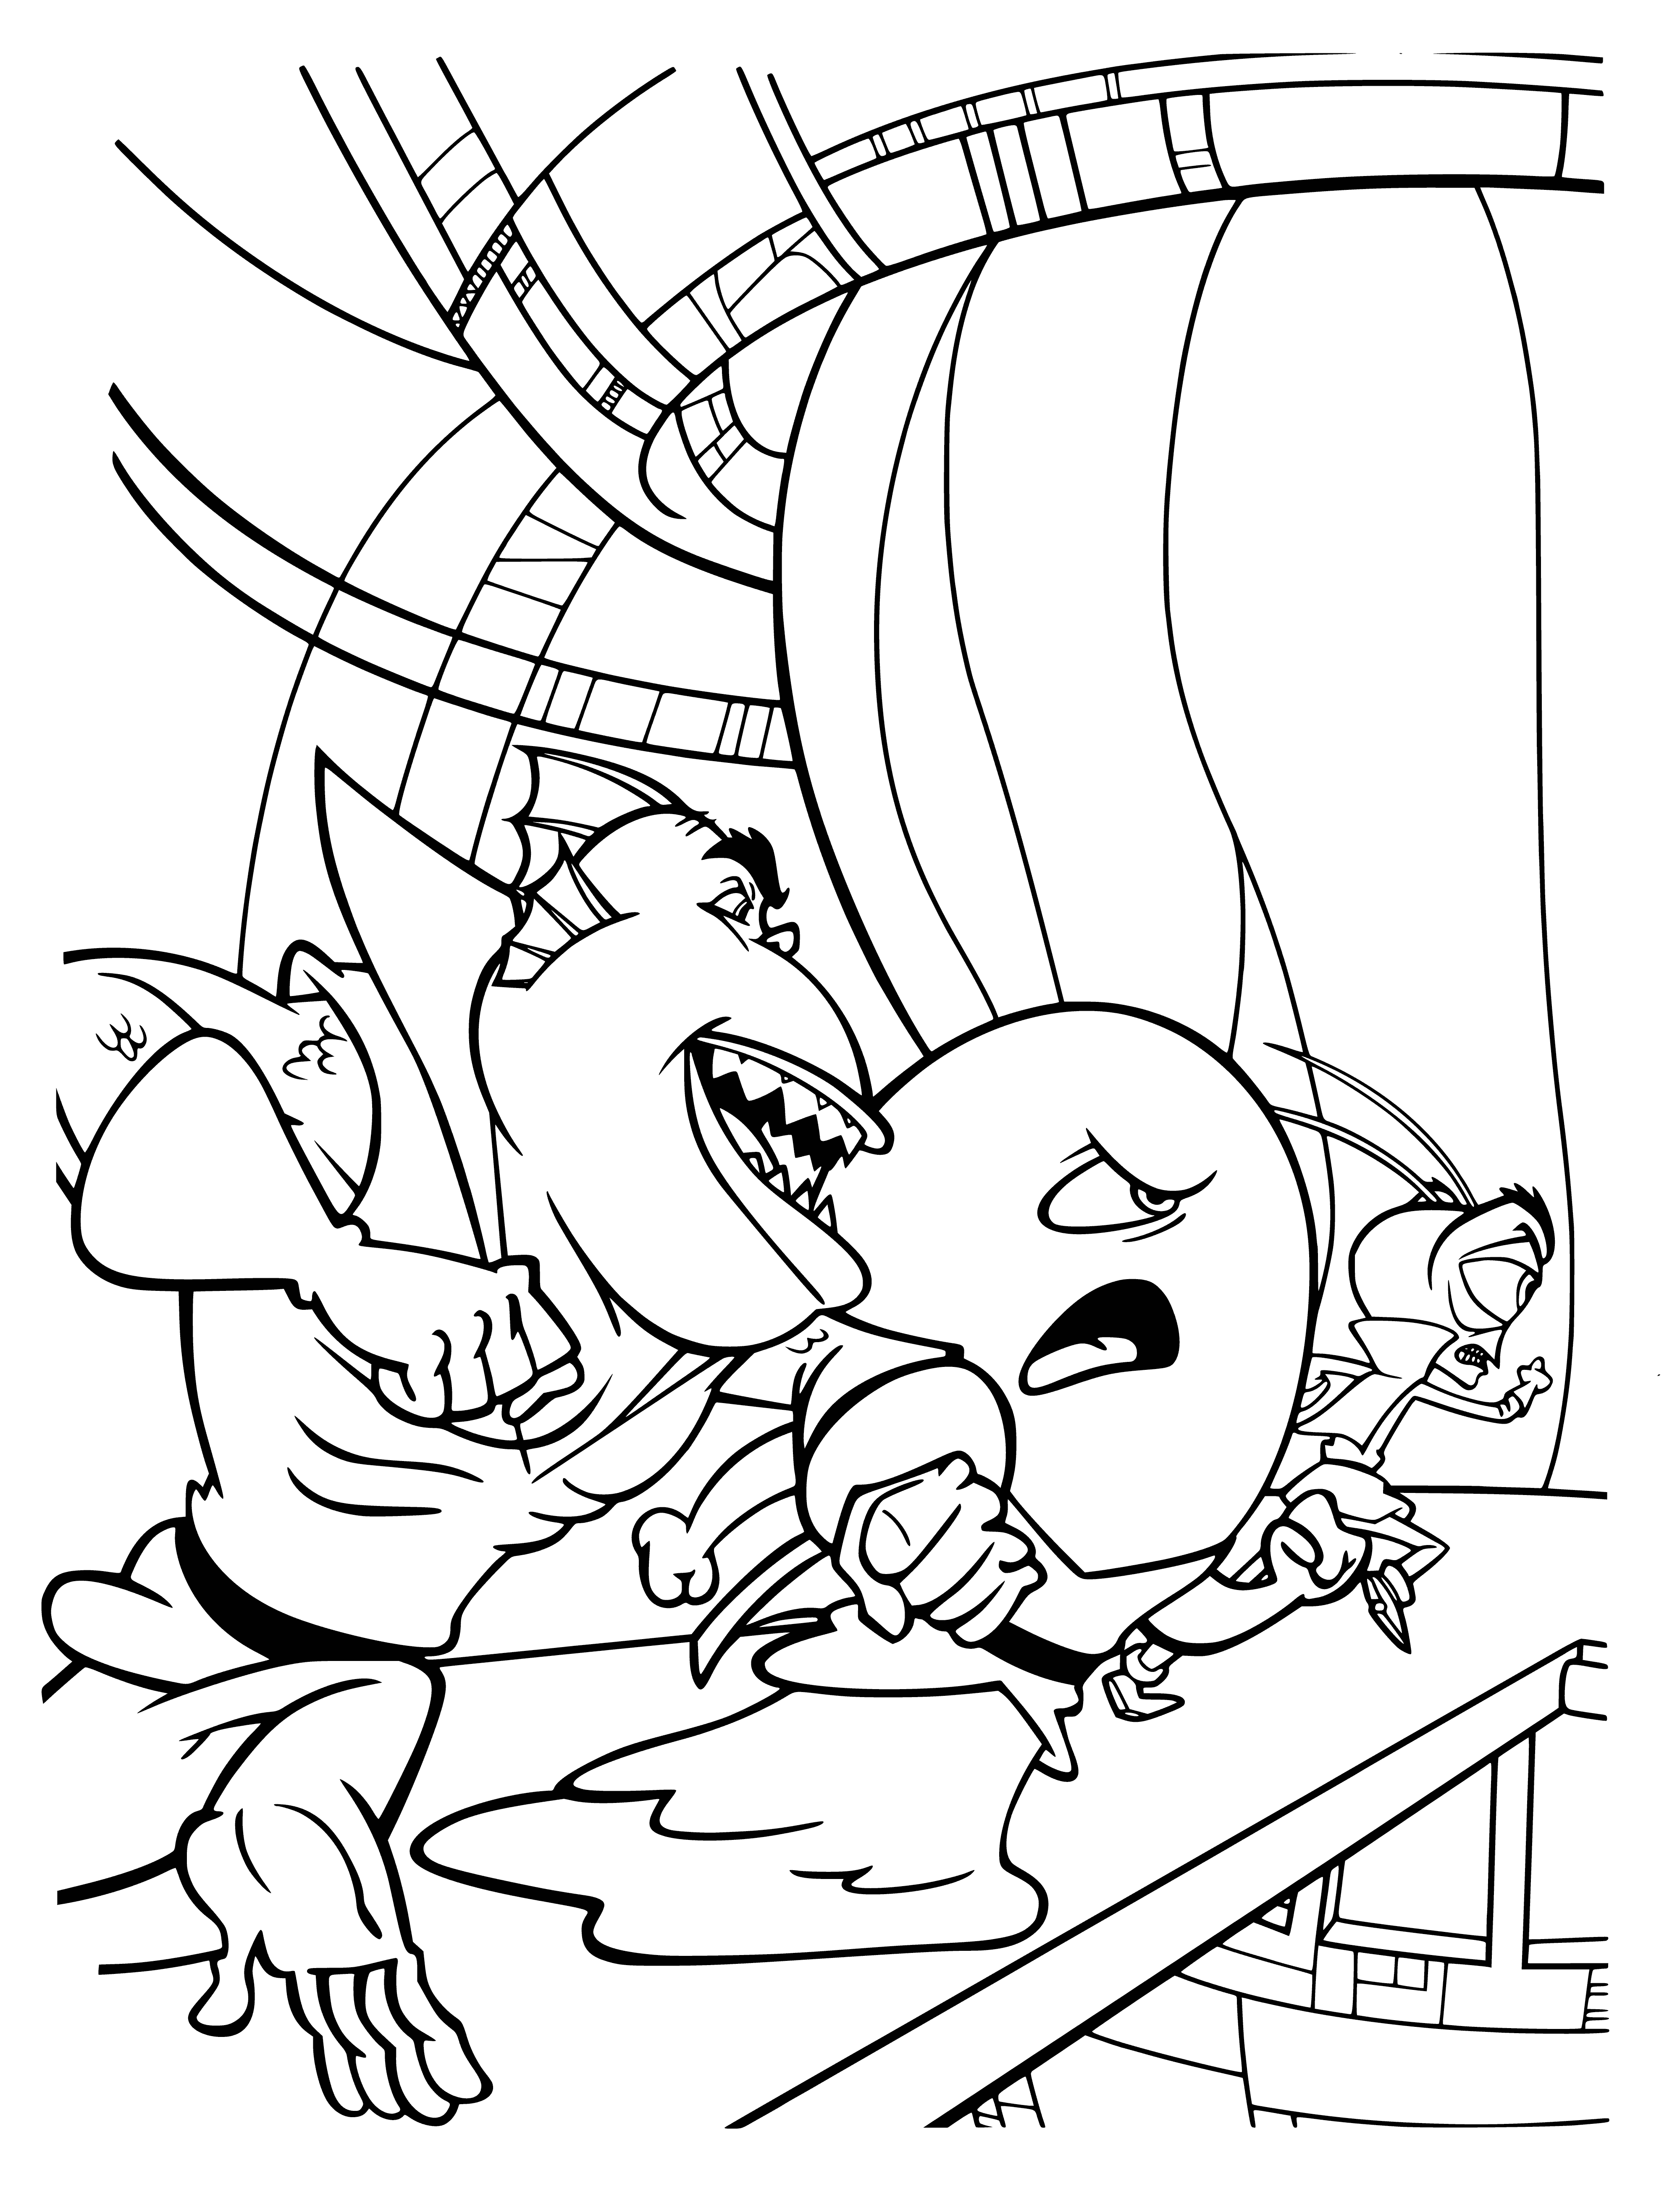 coloring page: A small human faces off against a menacing green alien ready to eat its prey in a Monsters vs Aliens coloring page.